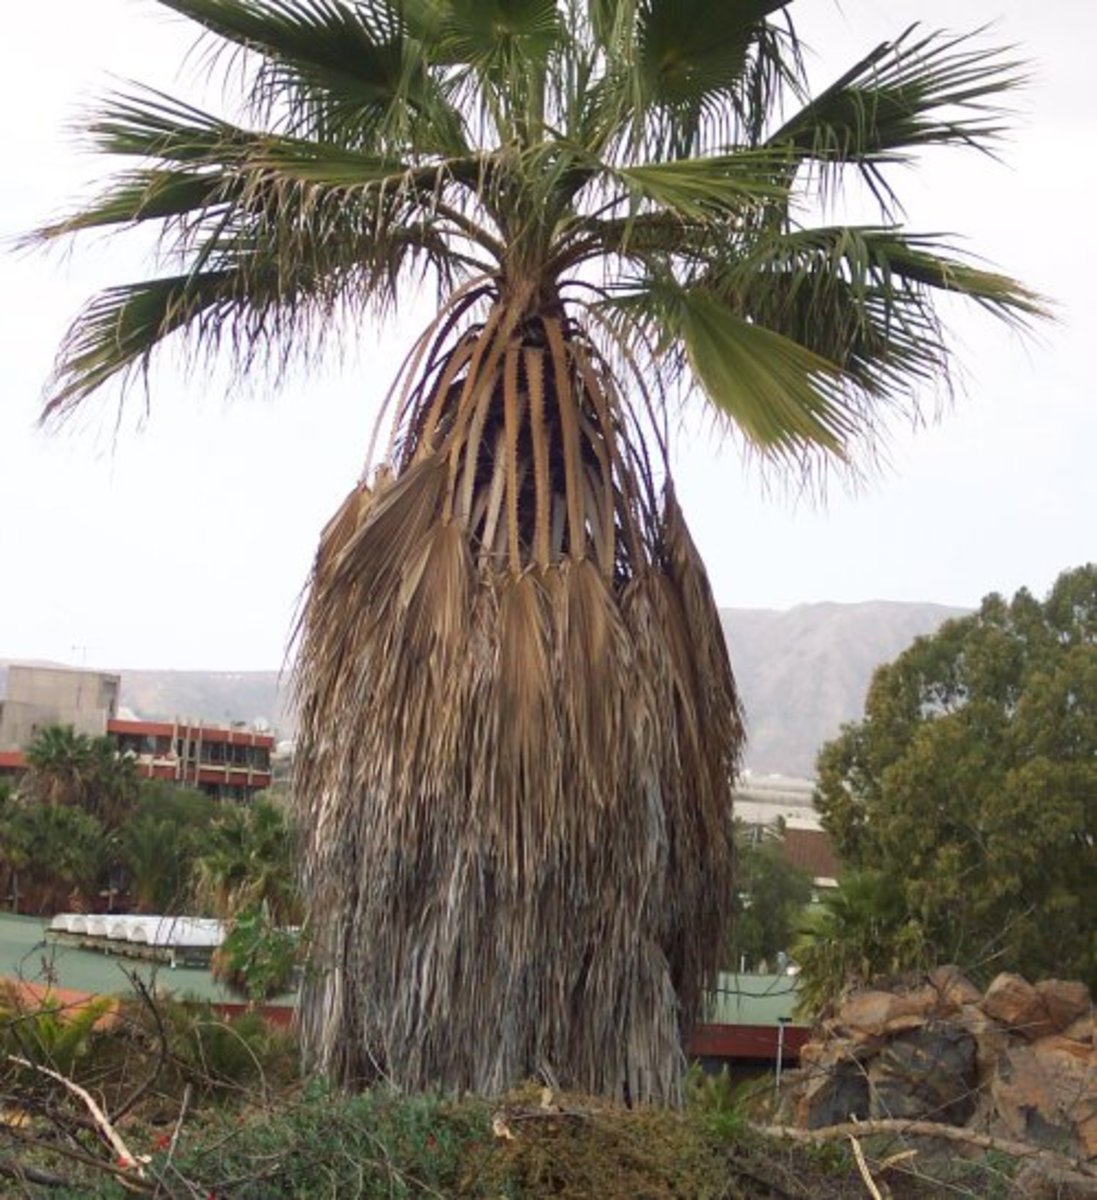 Petticoat palm. Photo by Steve Andrews